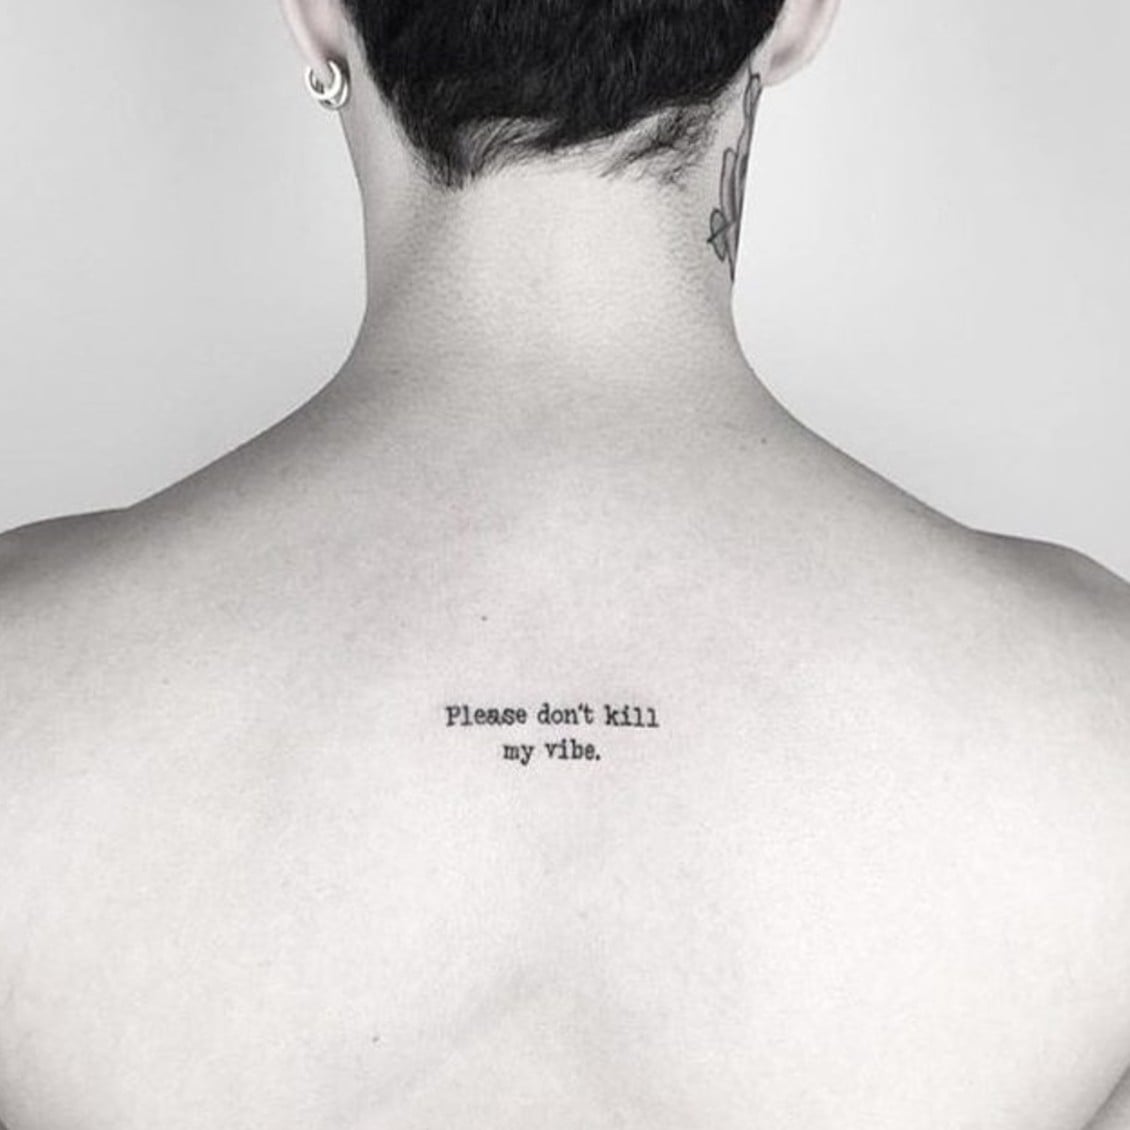 How much is a small back tattoo